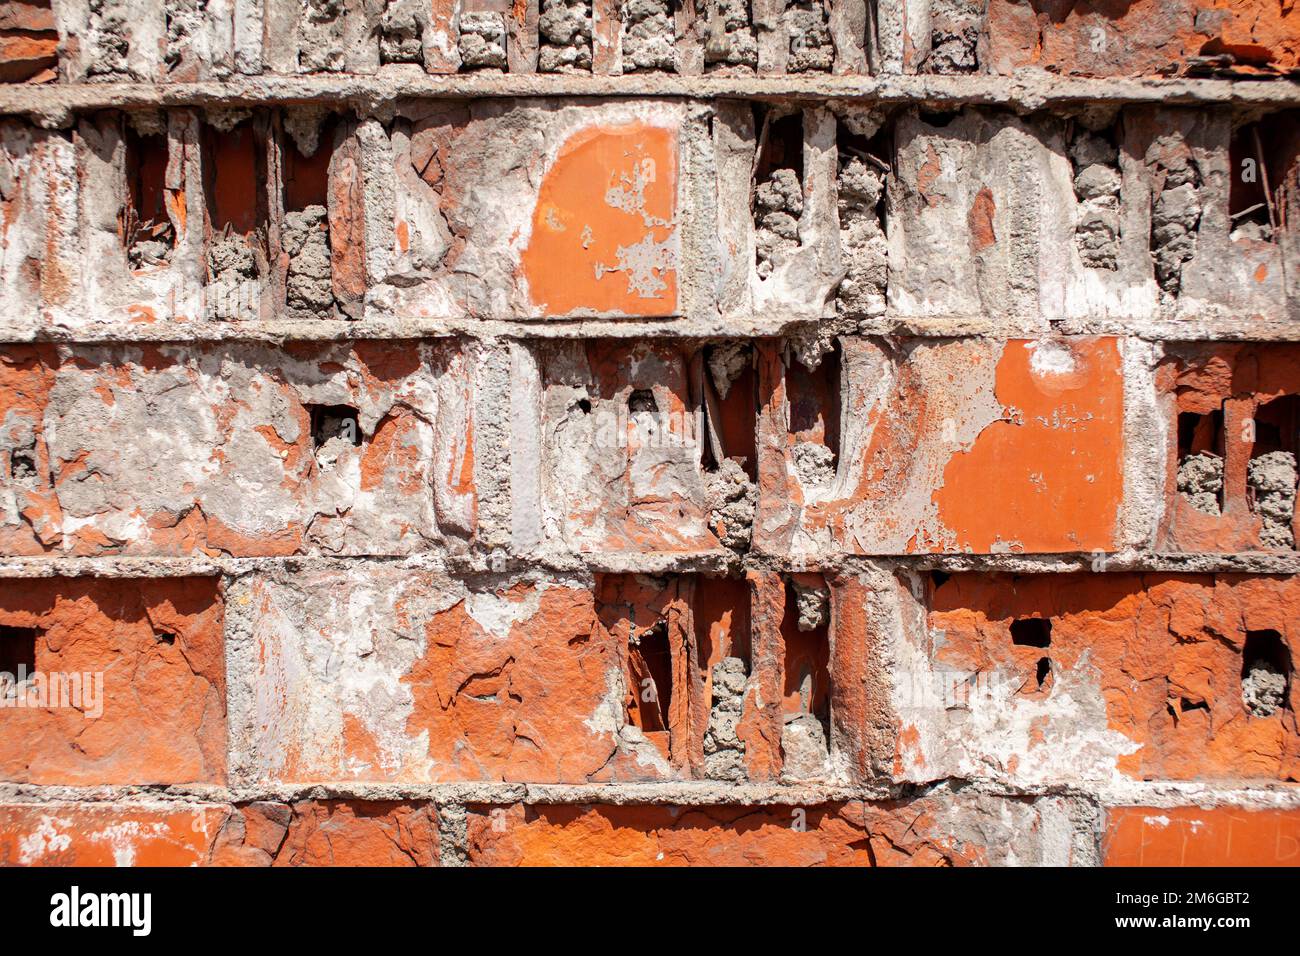 Old red brick wall. The bricks are laid in rows. Grunge stone texture. Stock Photo